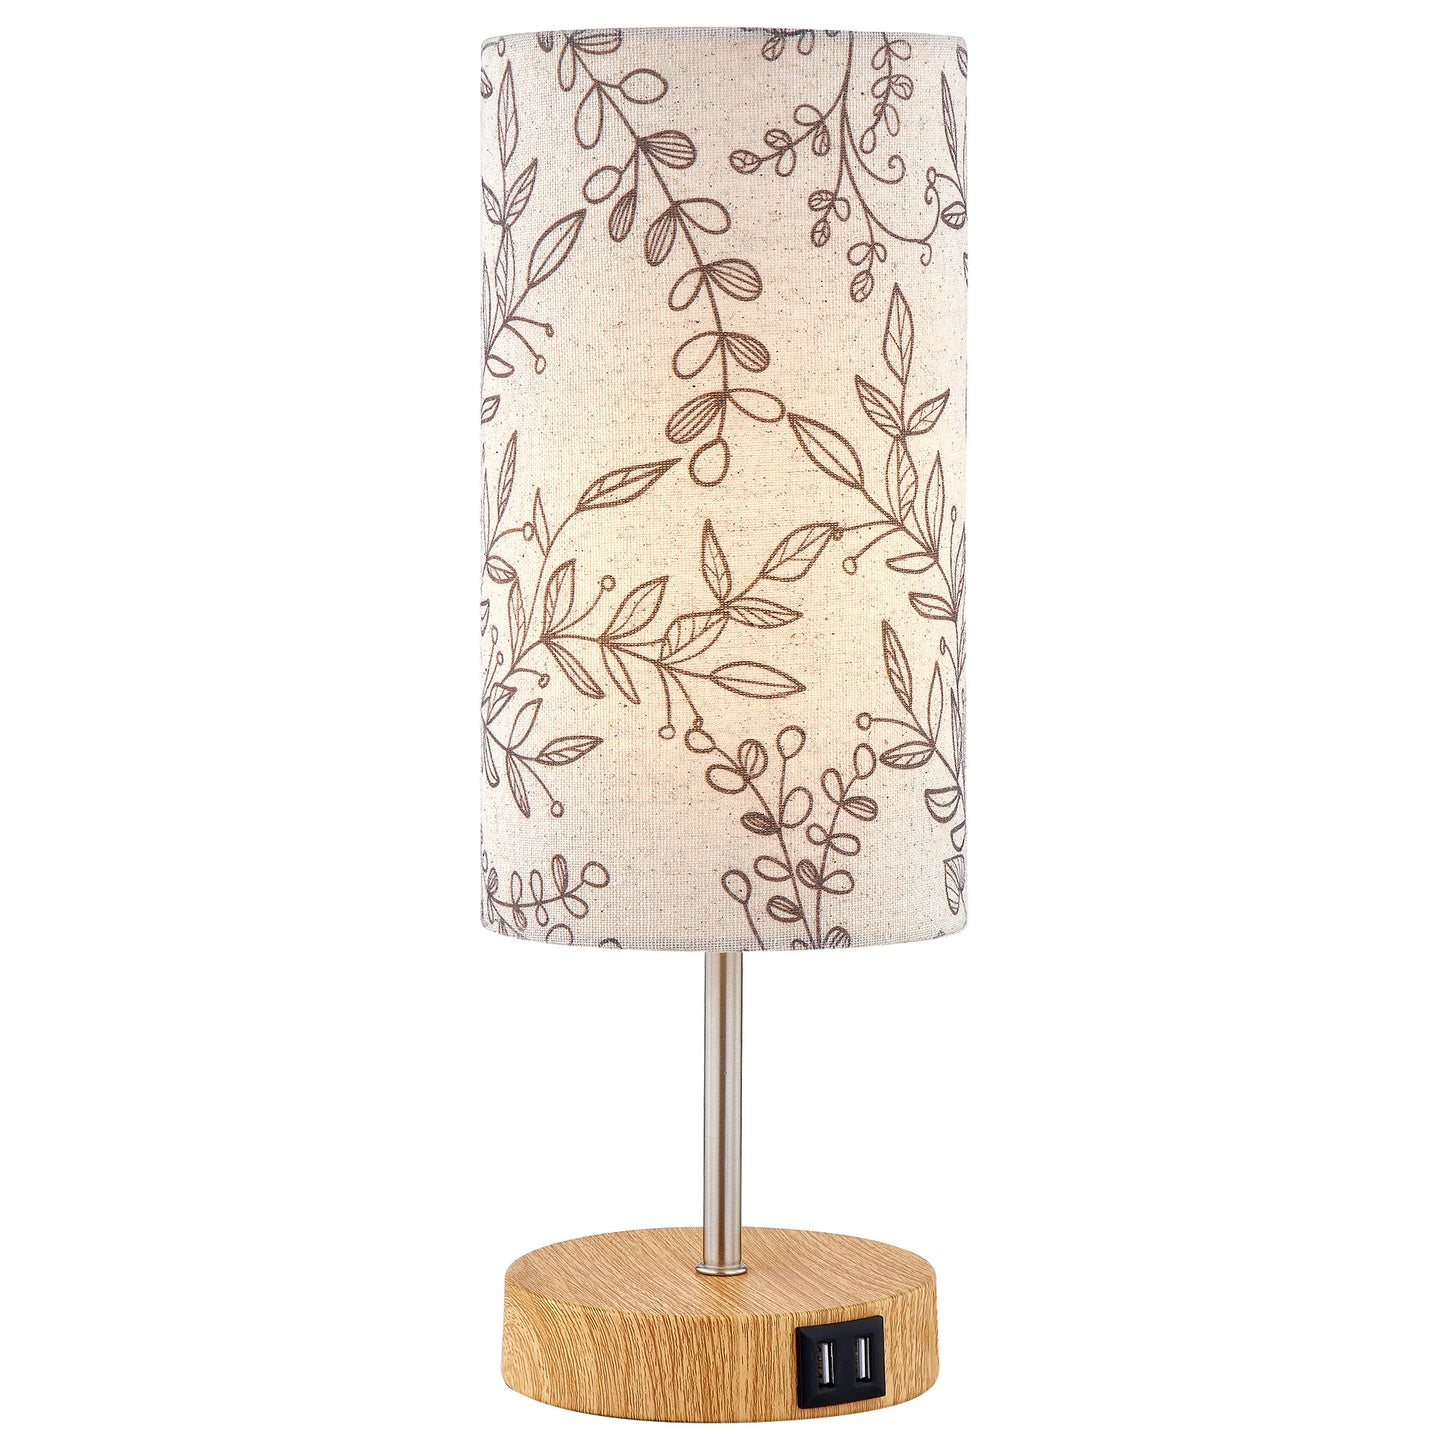 Floral Table Lamp with Touch-Sensitive Dimming & Dual USB Charging Ports